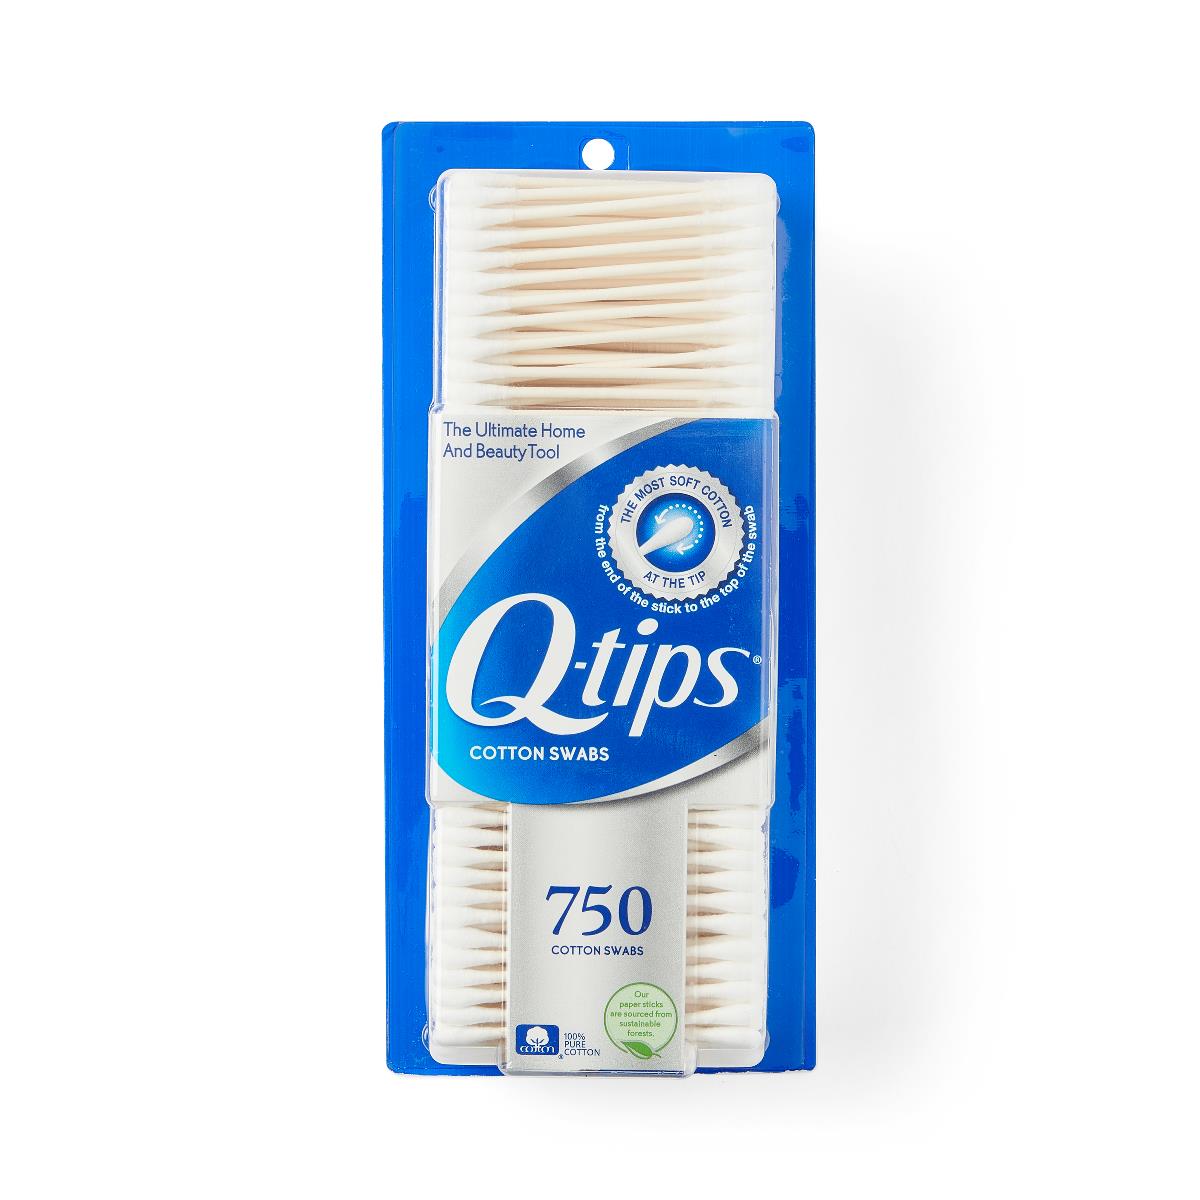  Q-TIps Cotton Swabs 170 Count (Pack of 3) : Beauty & Personal  Care